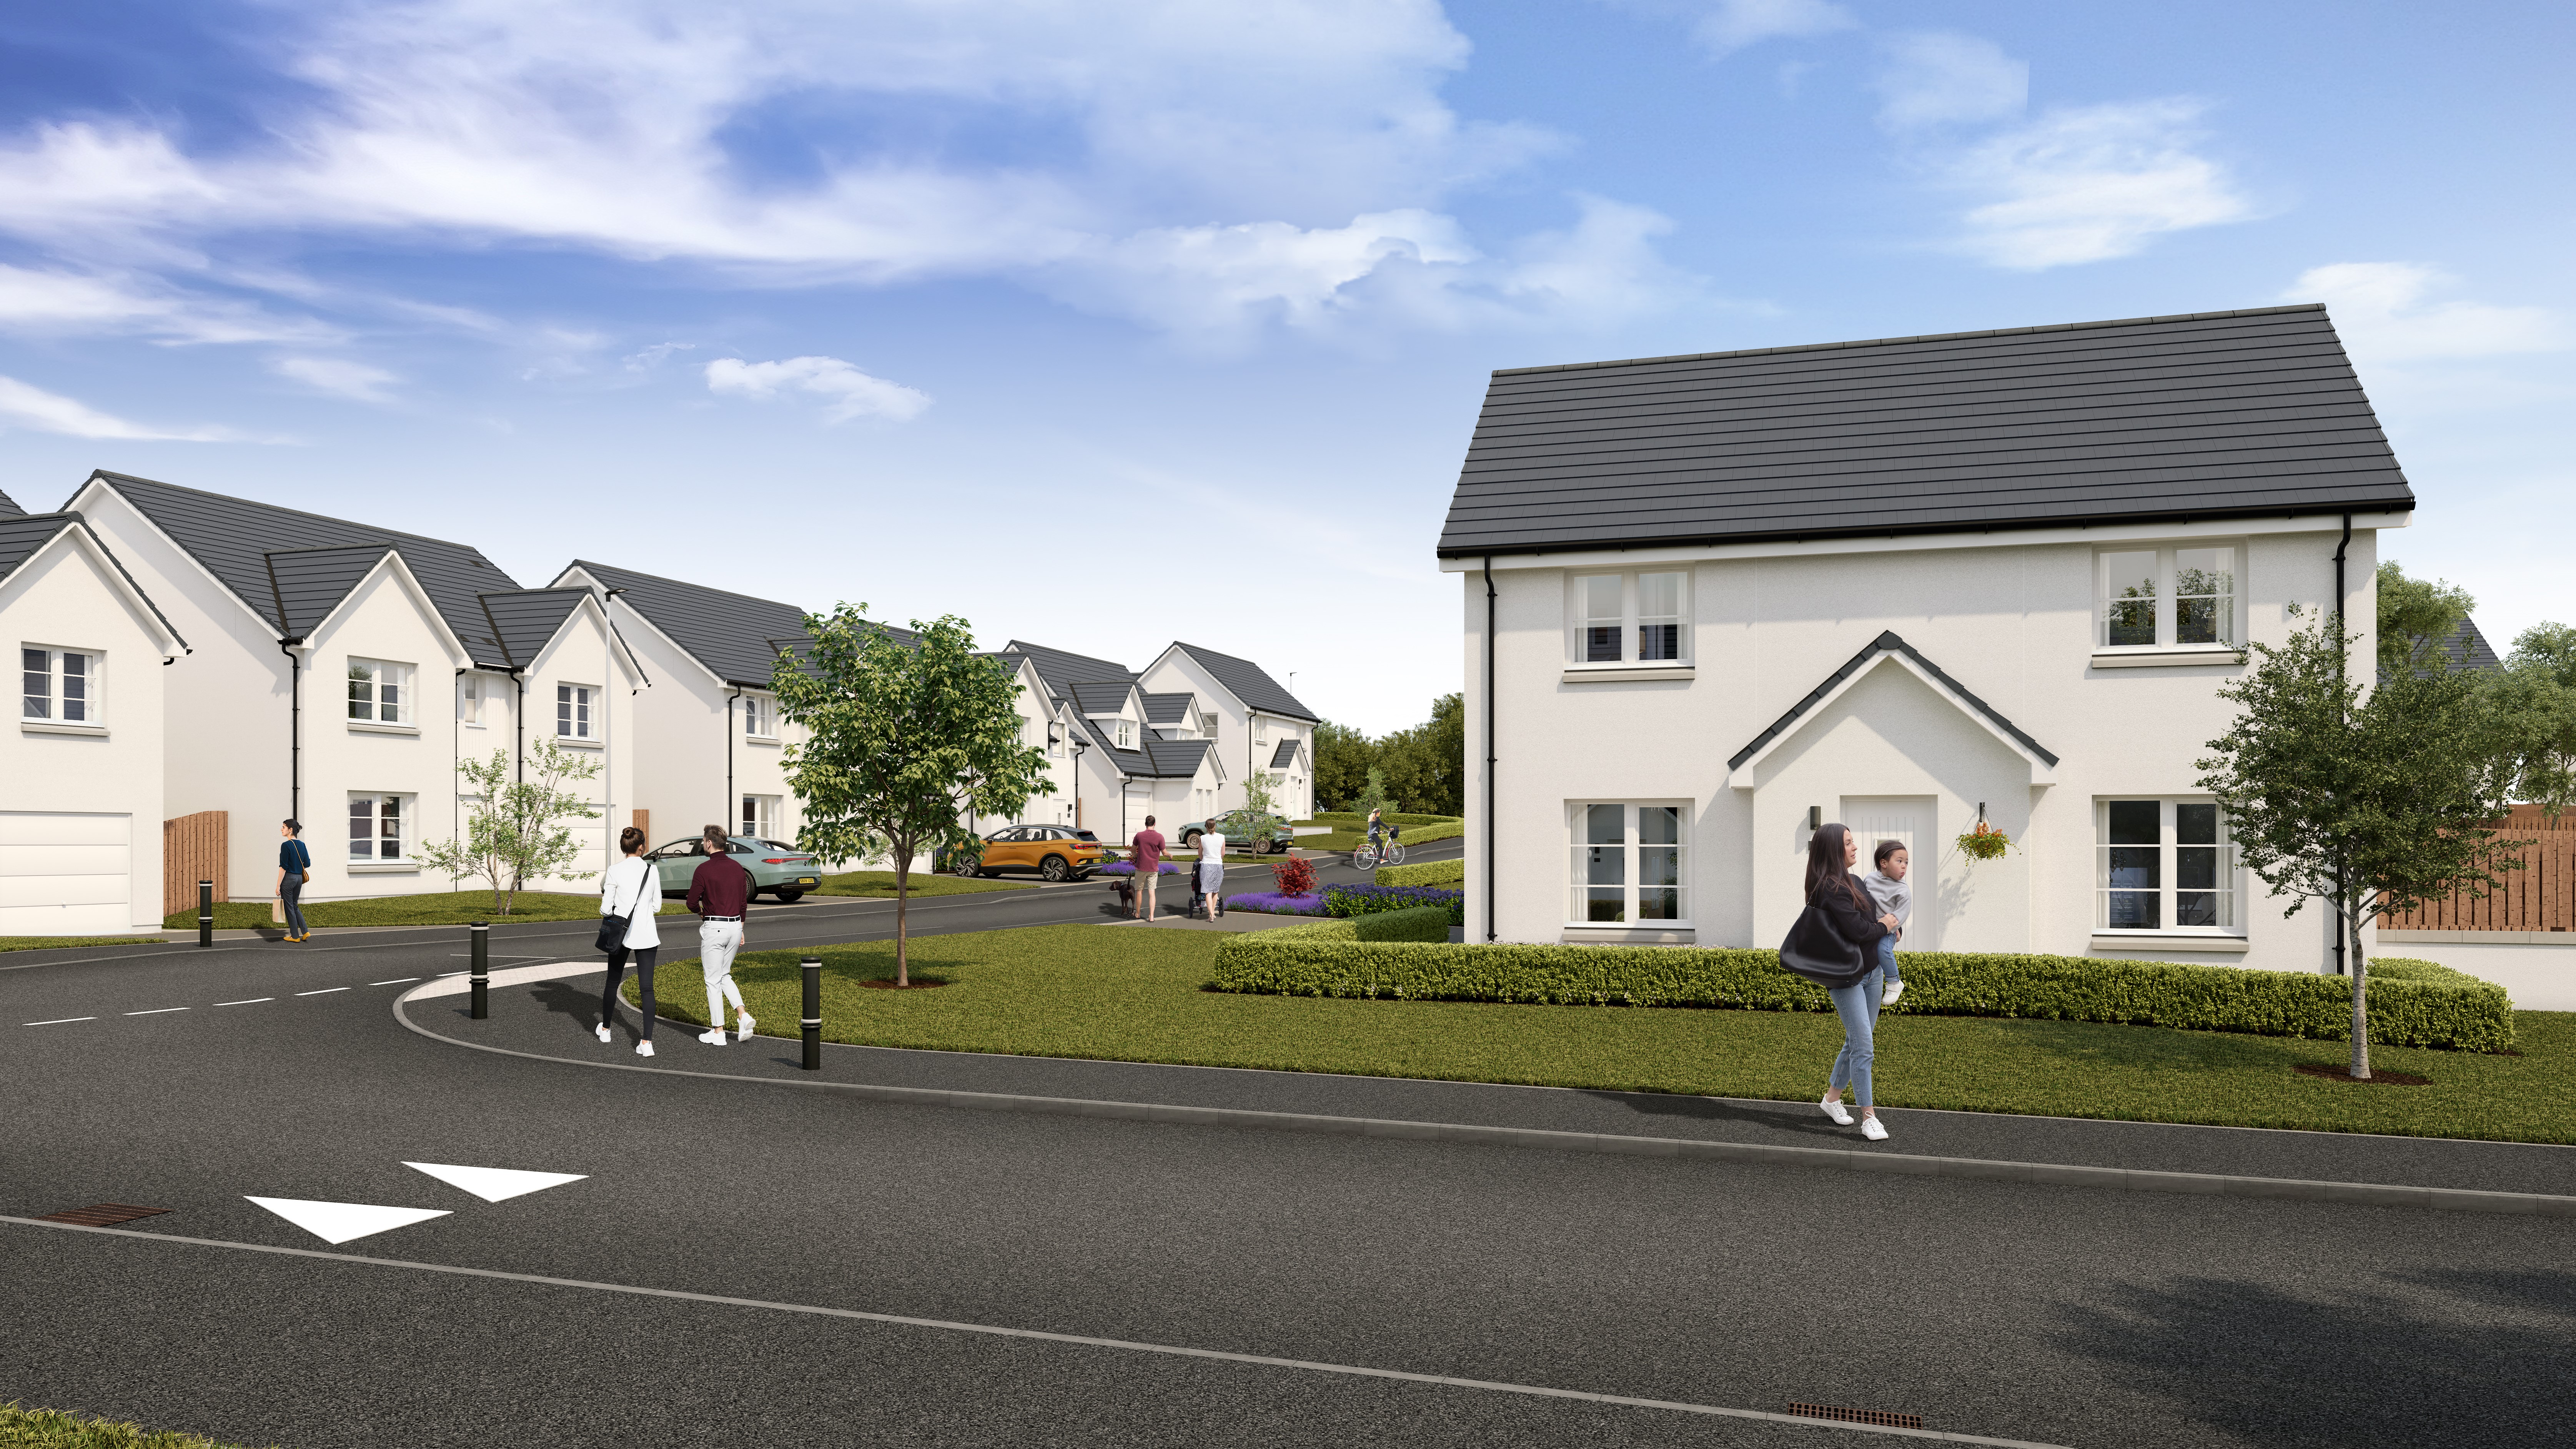 Fifty new homes in Colinsburgh approved by Fife Council